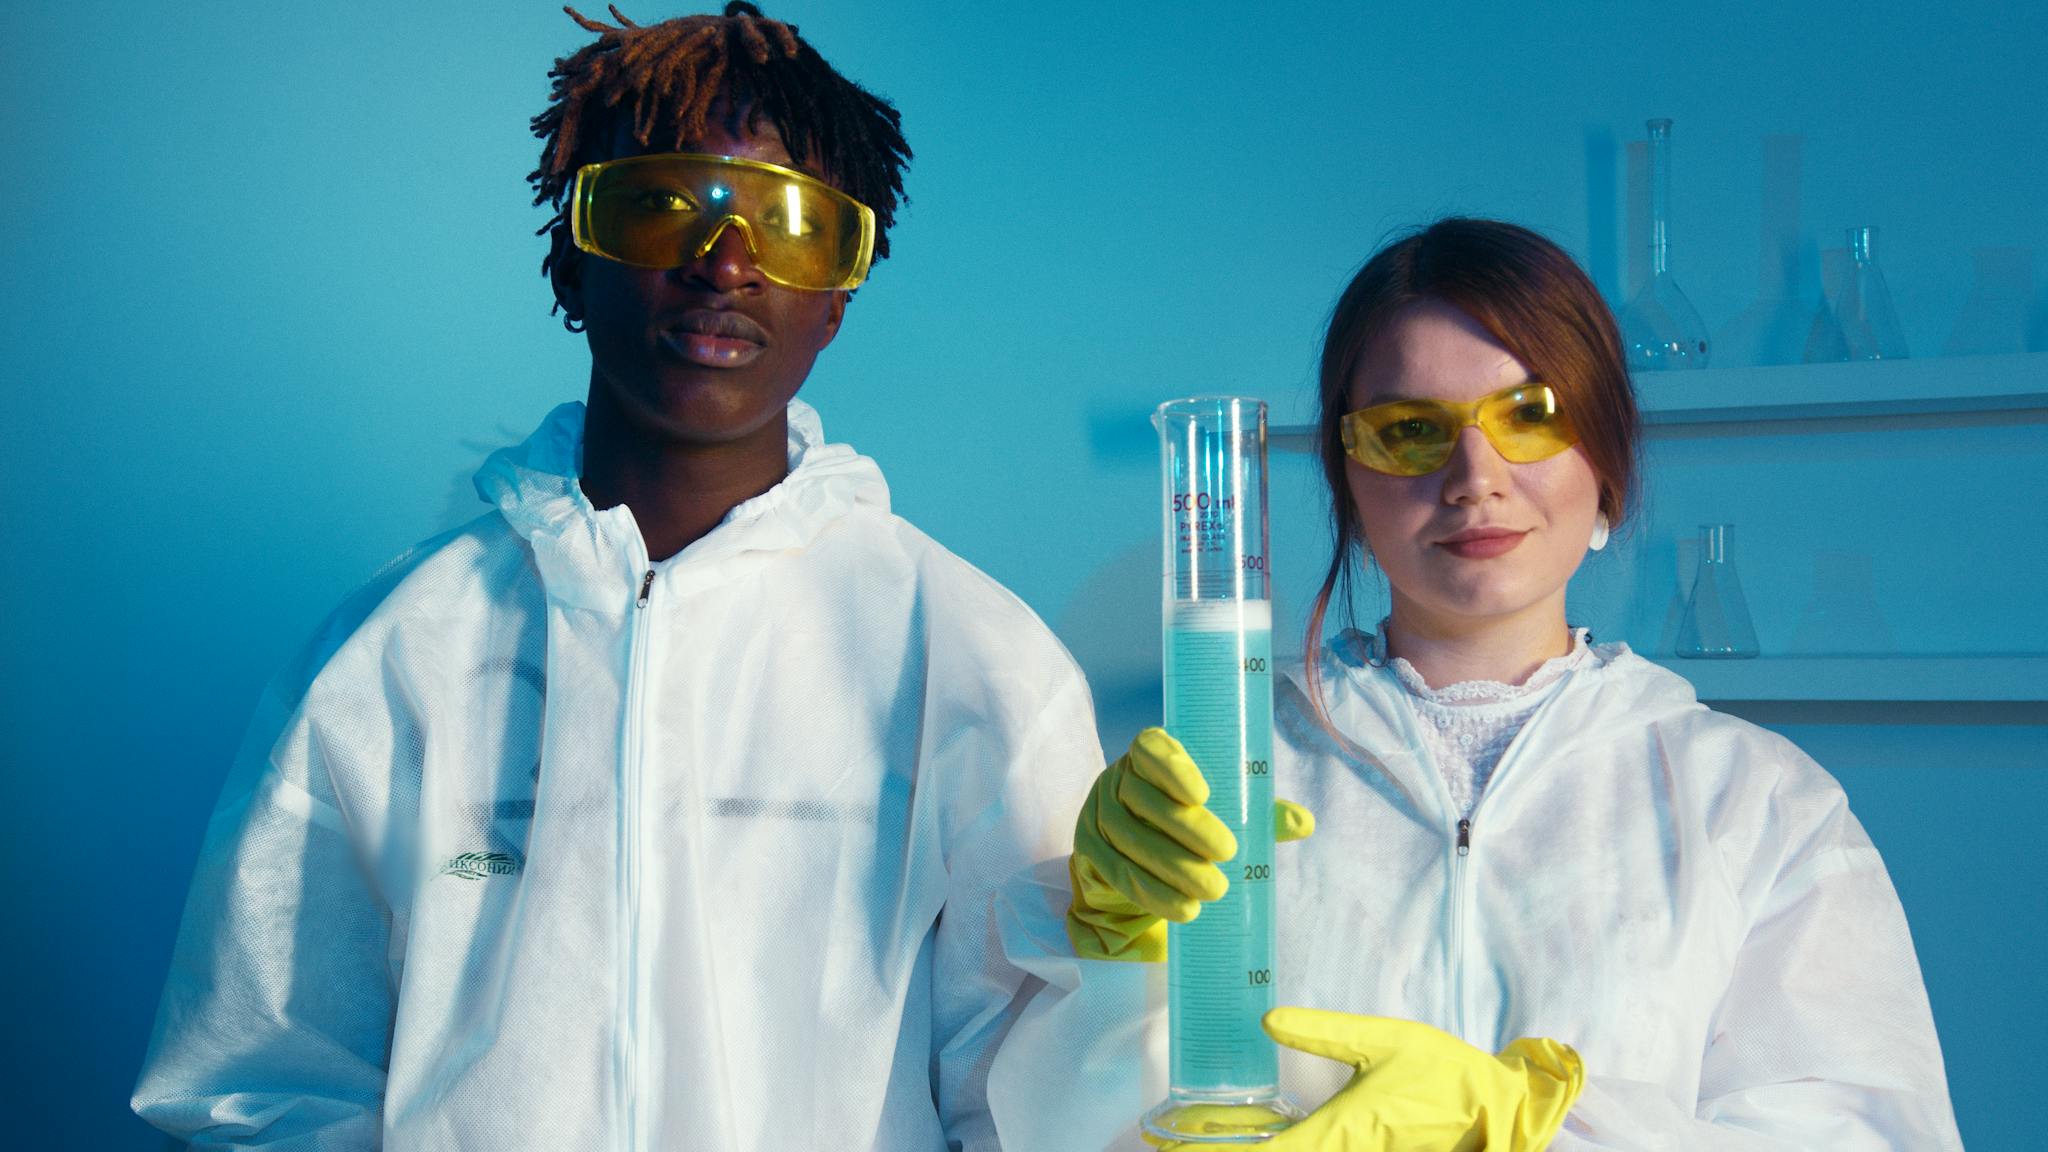 A Man and a Woman Looking at the Camera While Holding a Big Graduated Cylinder